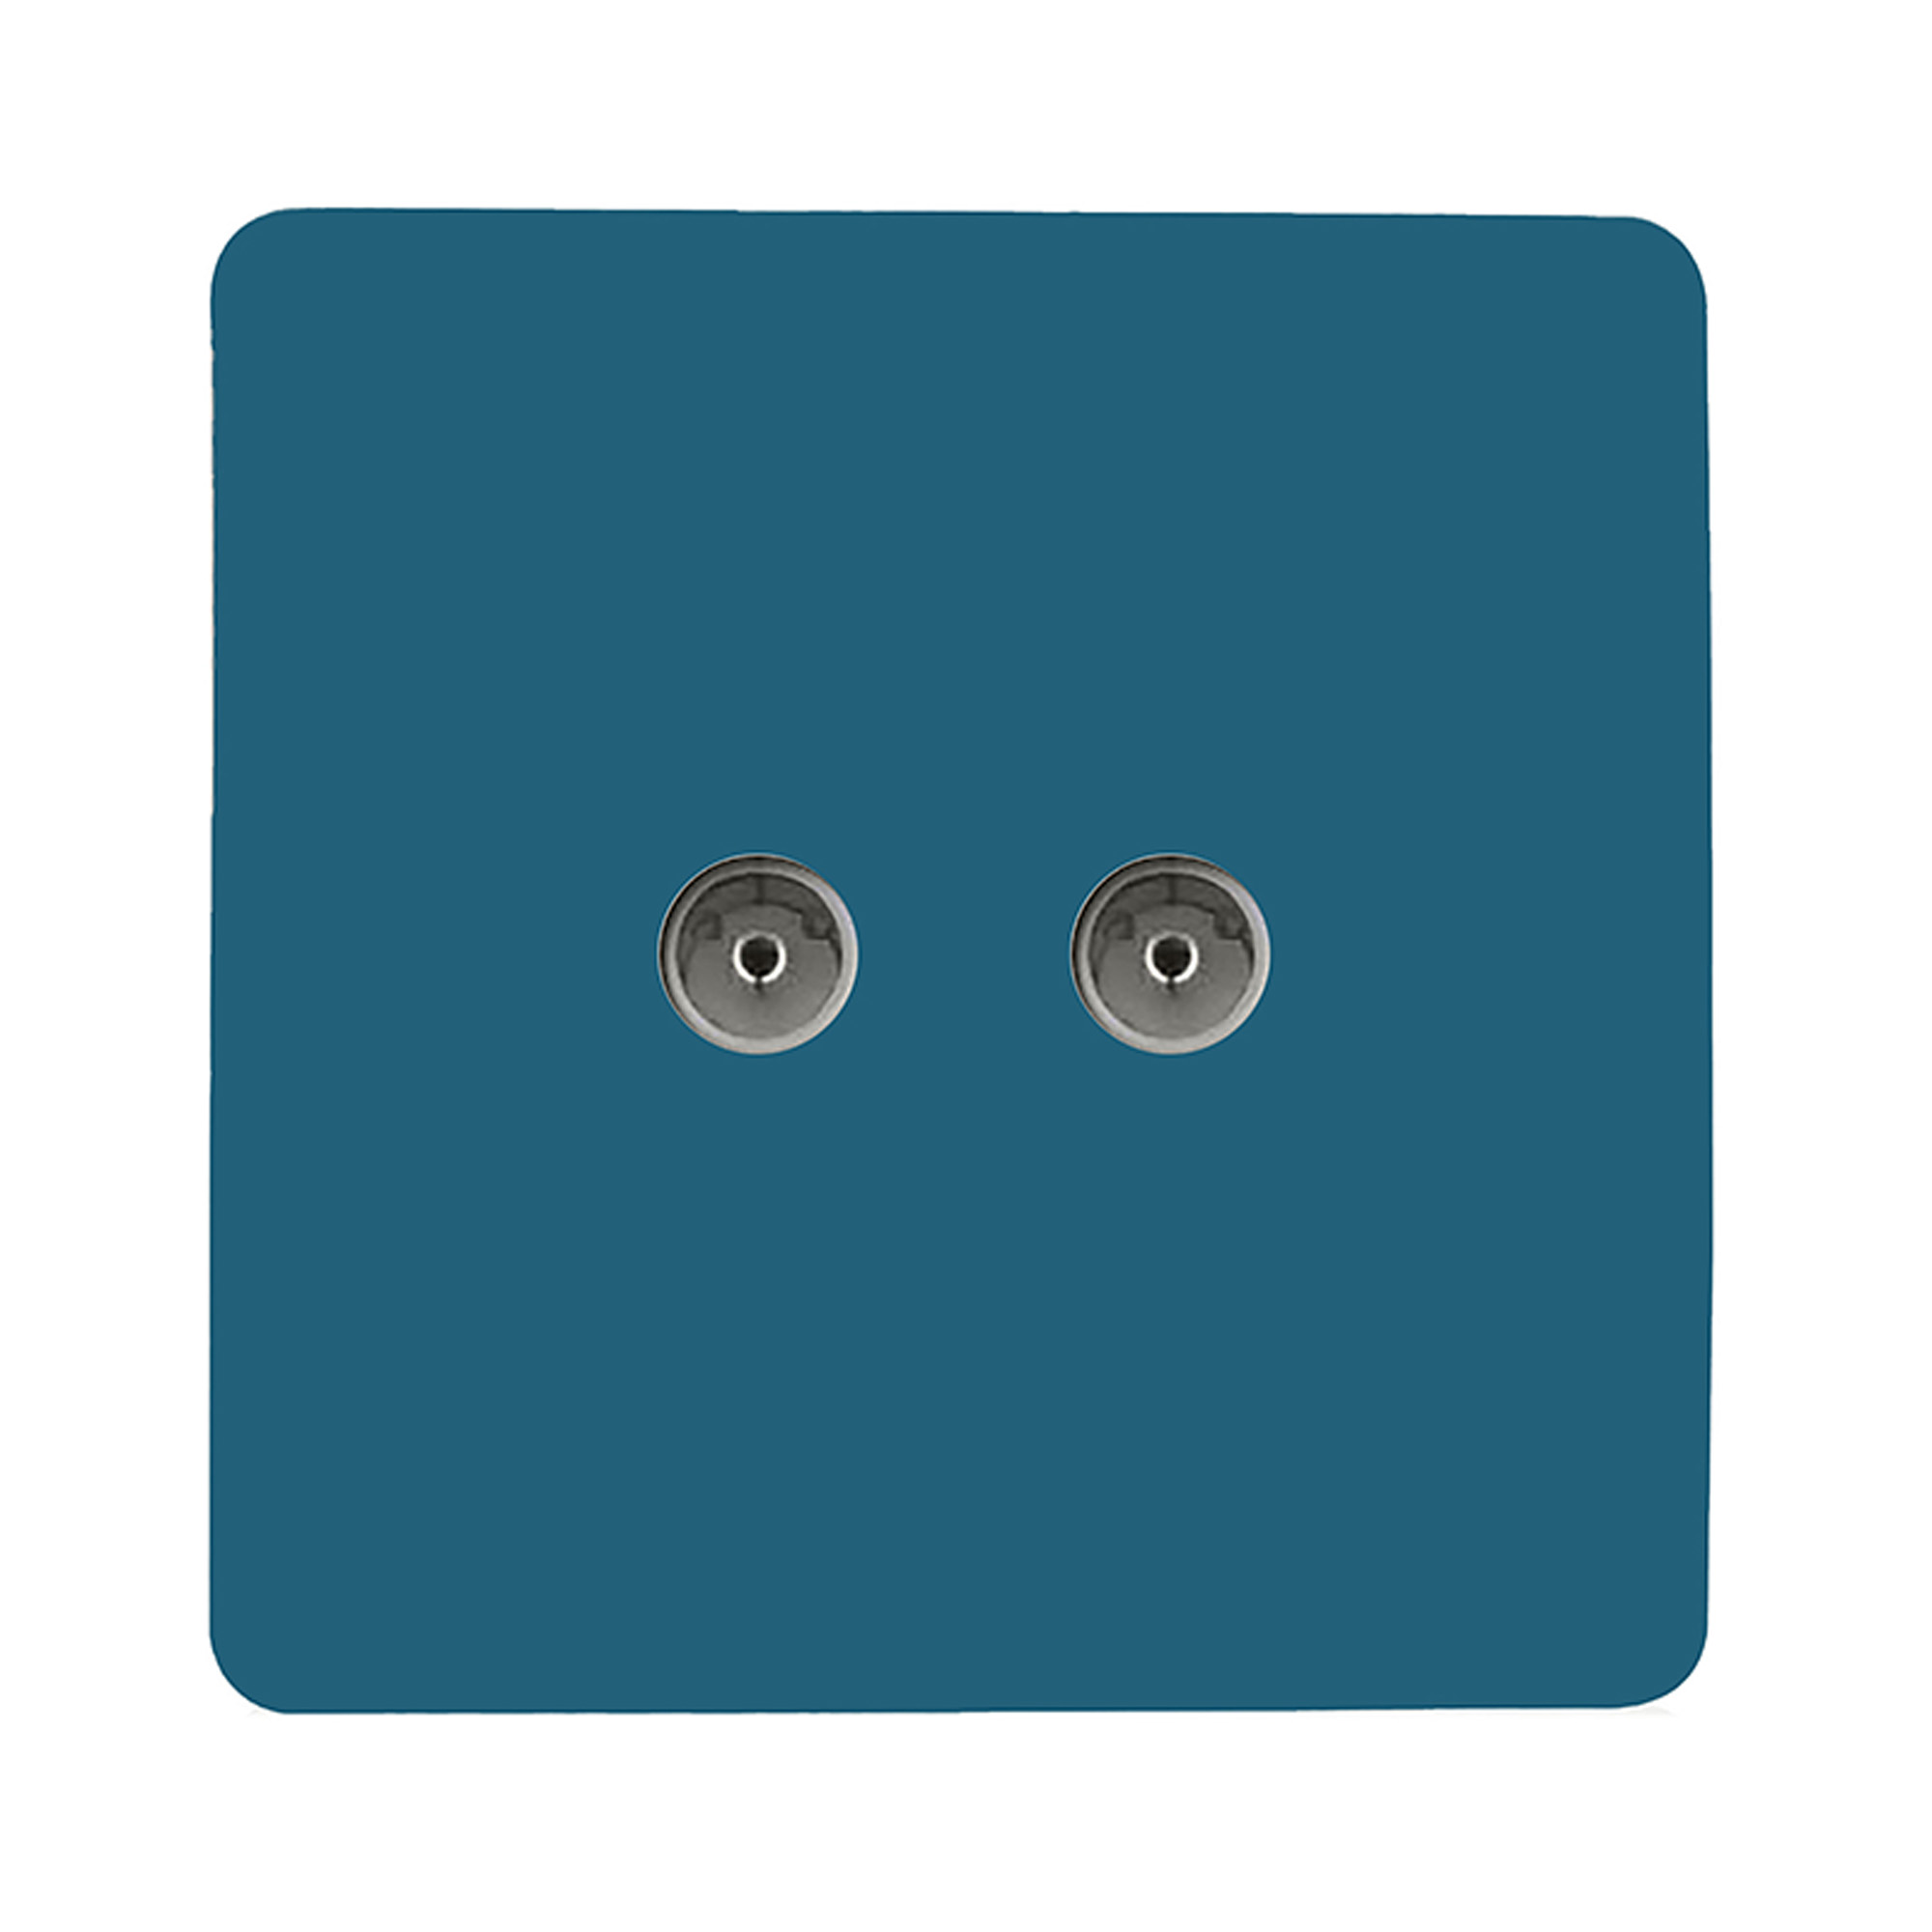 ART-2TVSOB  Twin TV Co-Axial Outlet Ocean Blue